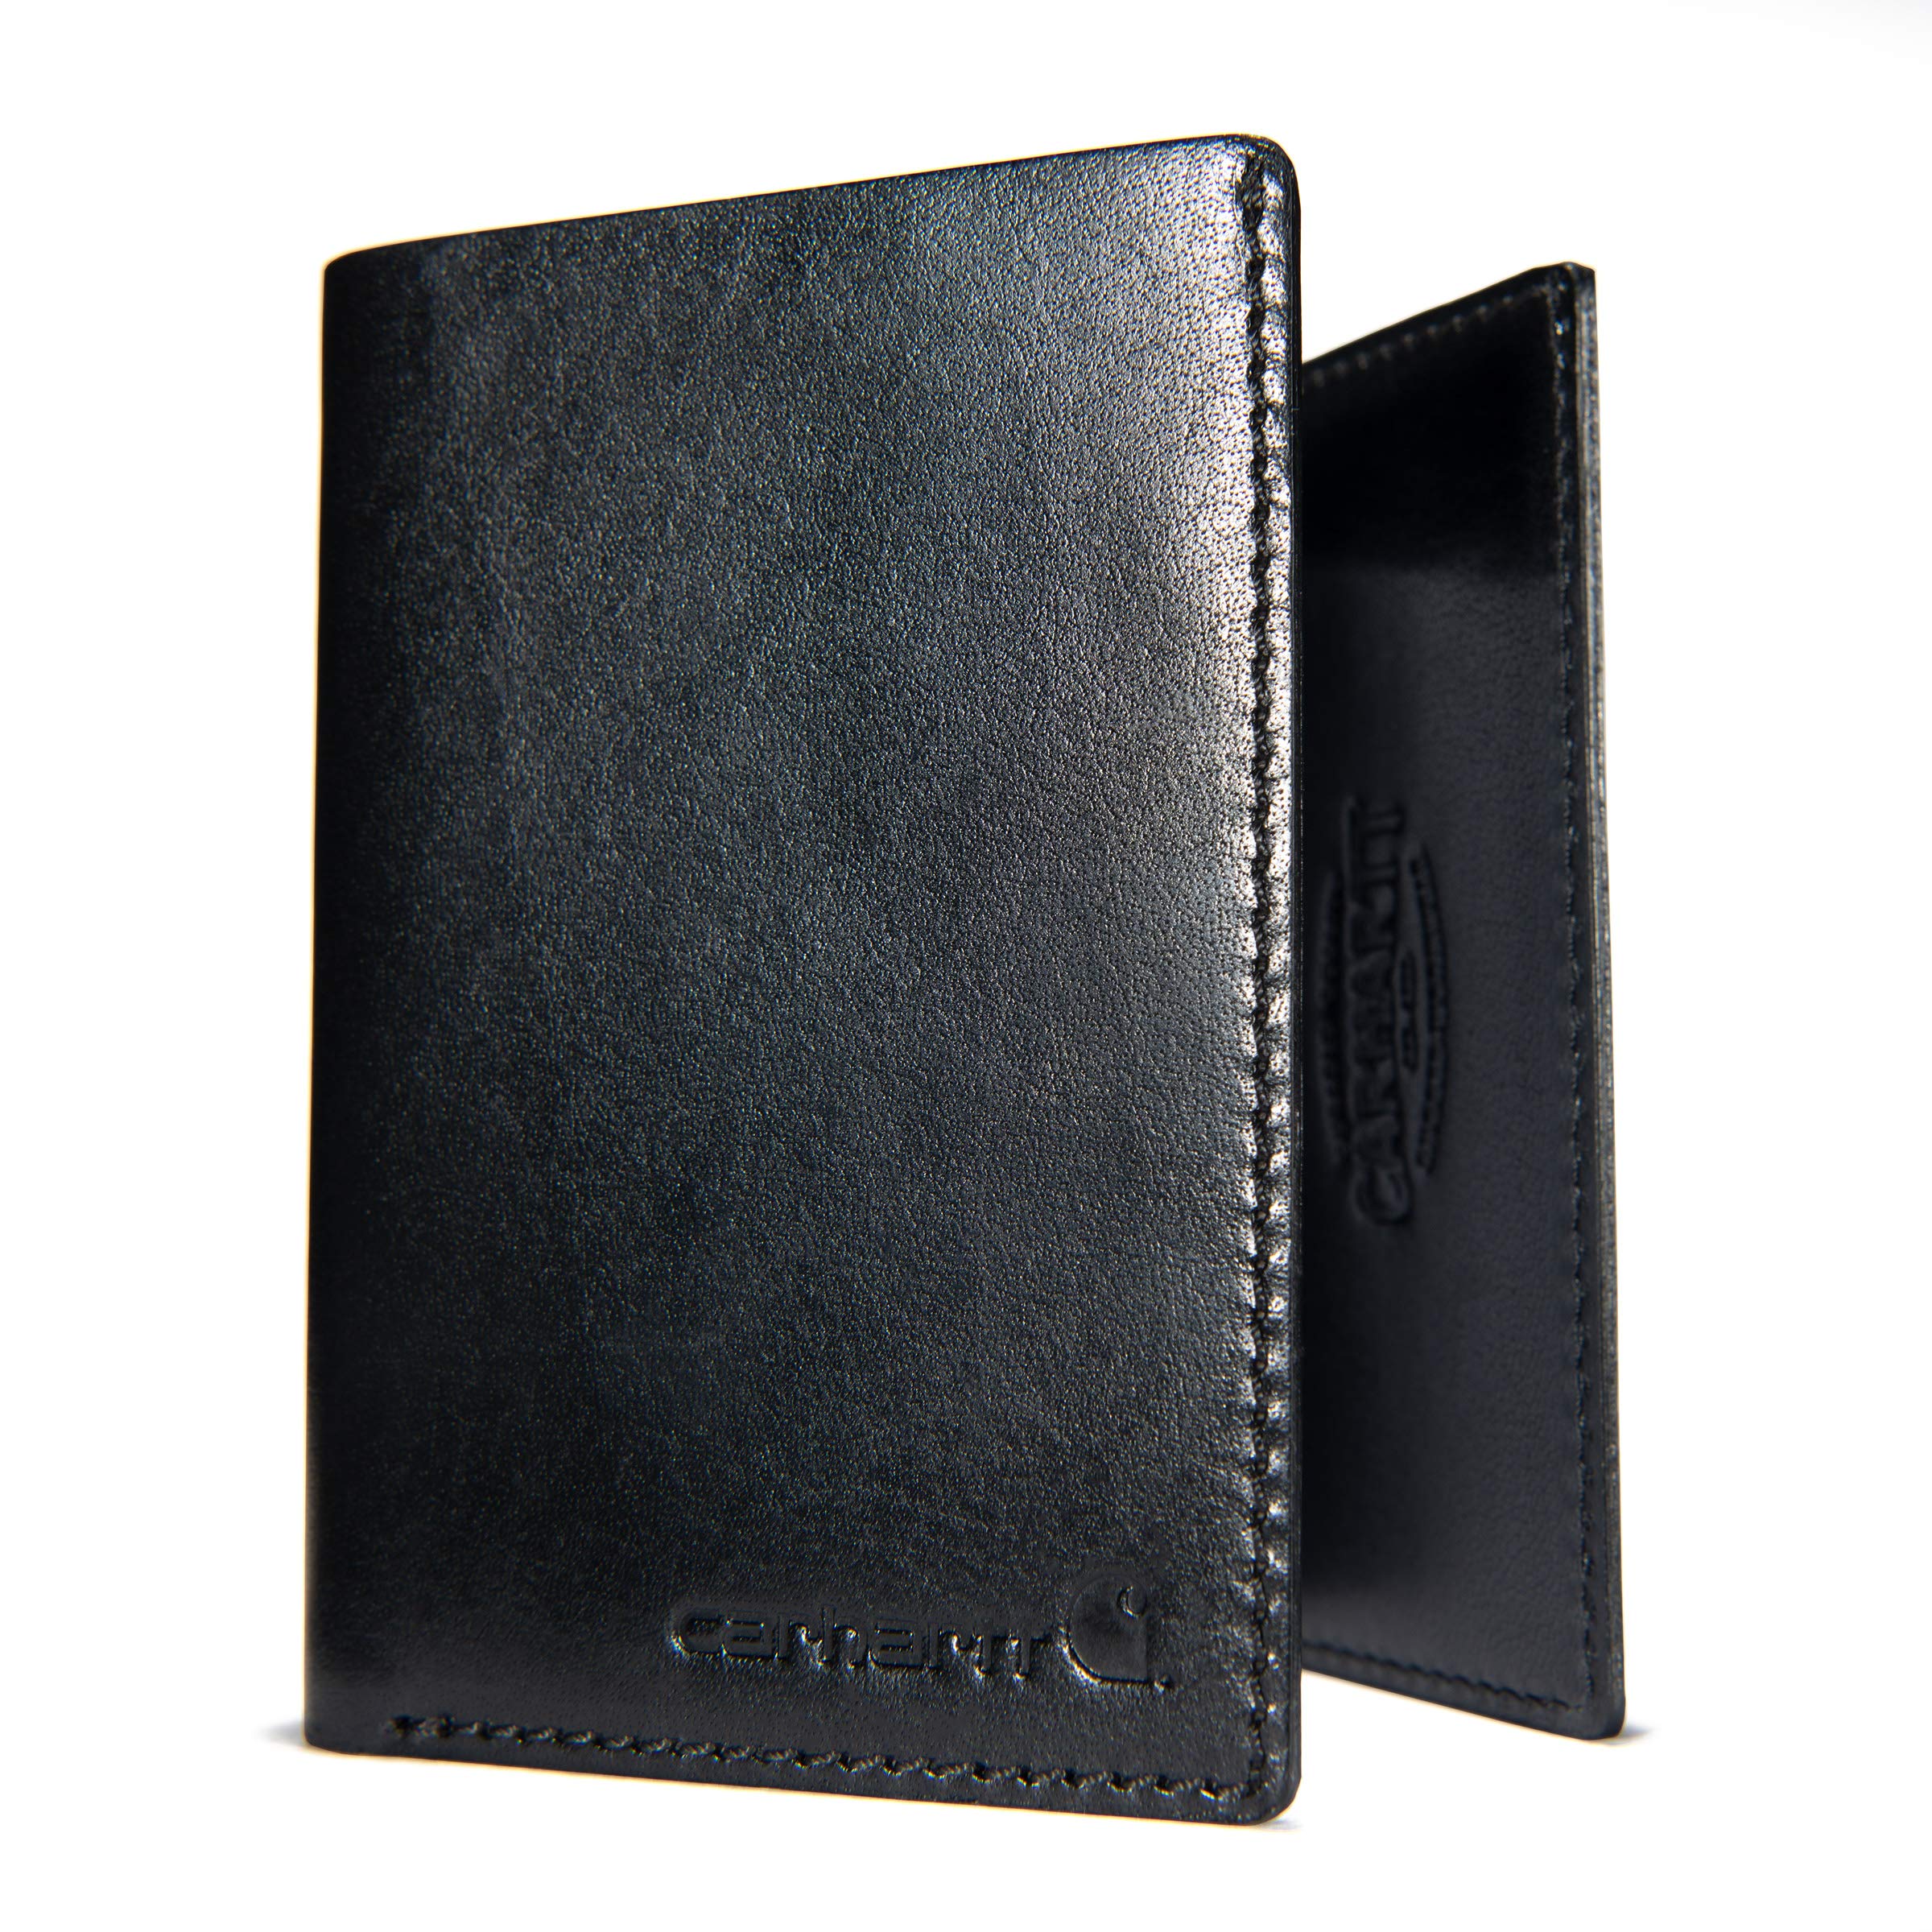 Carhartt Men's Trifold, Durable Wallets, Available in Leather and Canvas Styles